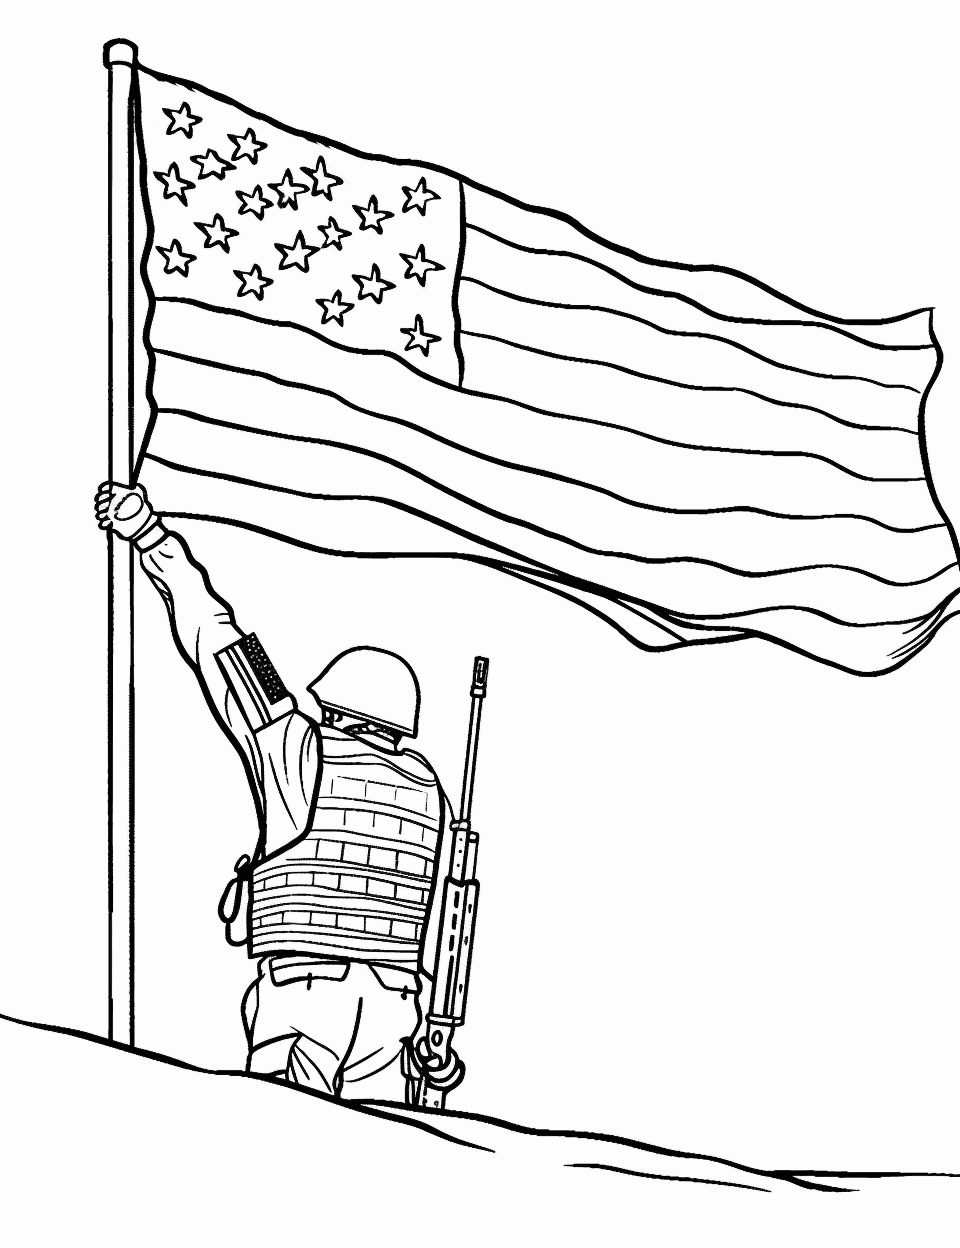 Soldiers Raising the Flag American Coloring Page - Soldier raising the American flag during a military operation.